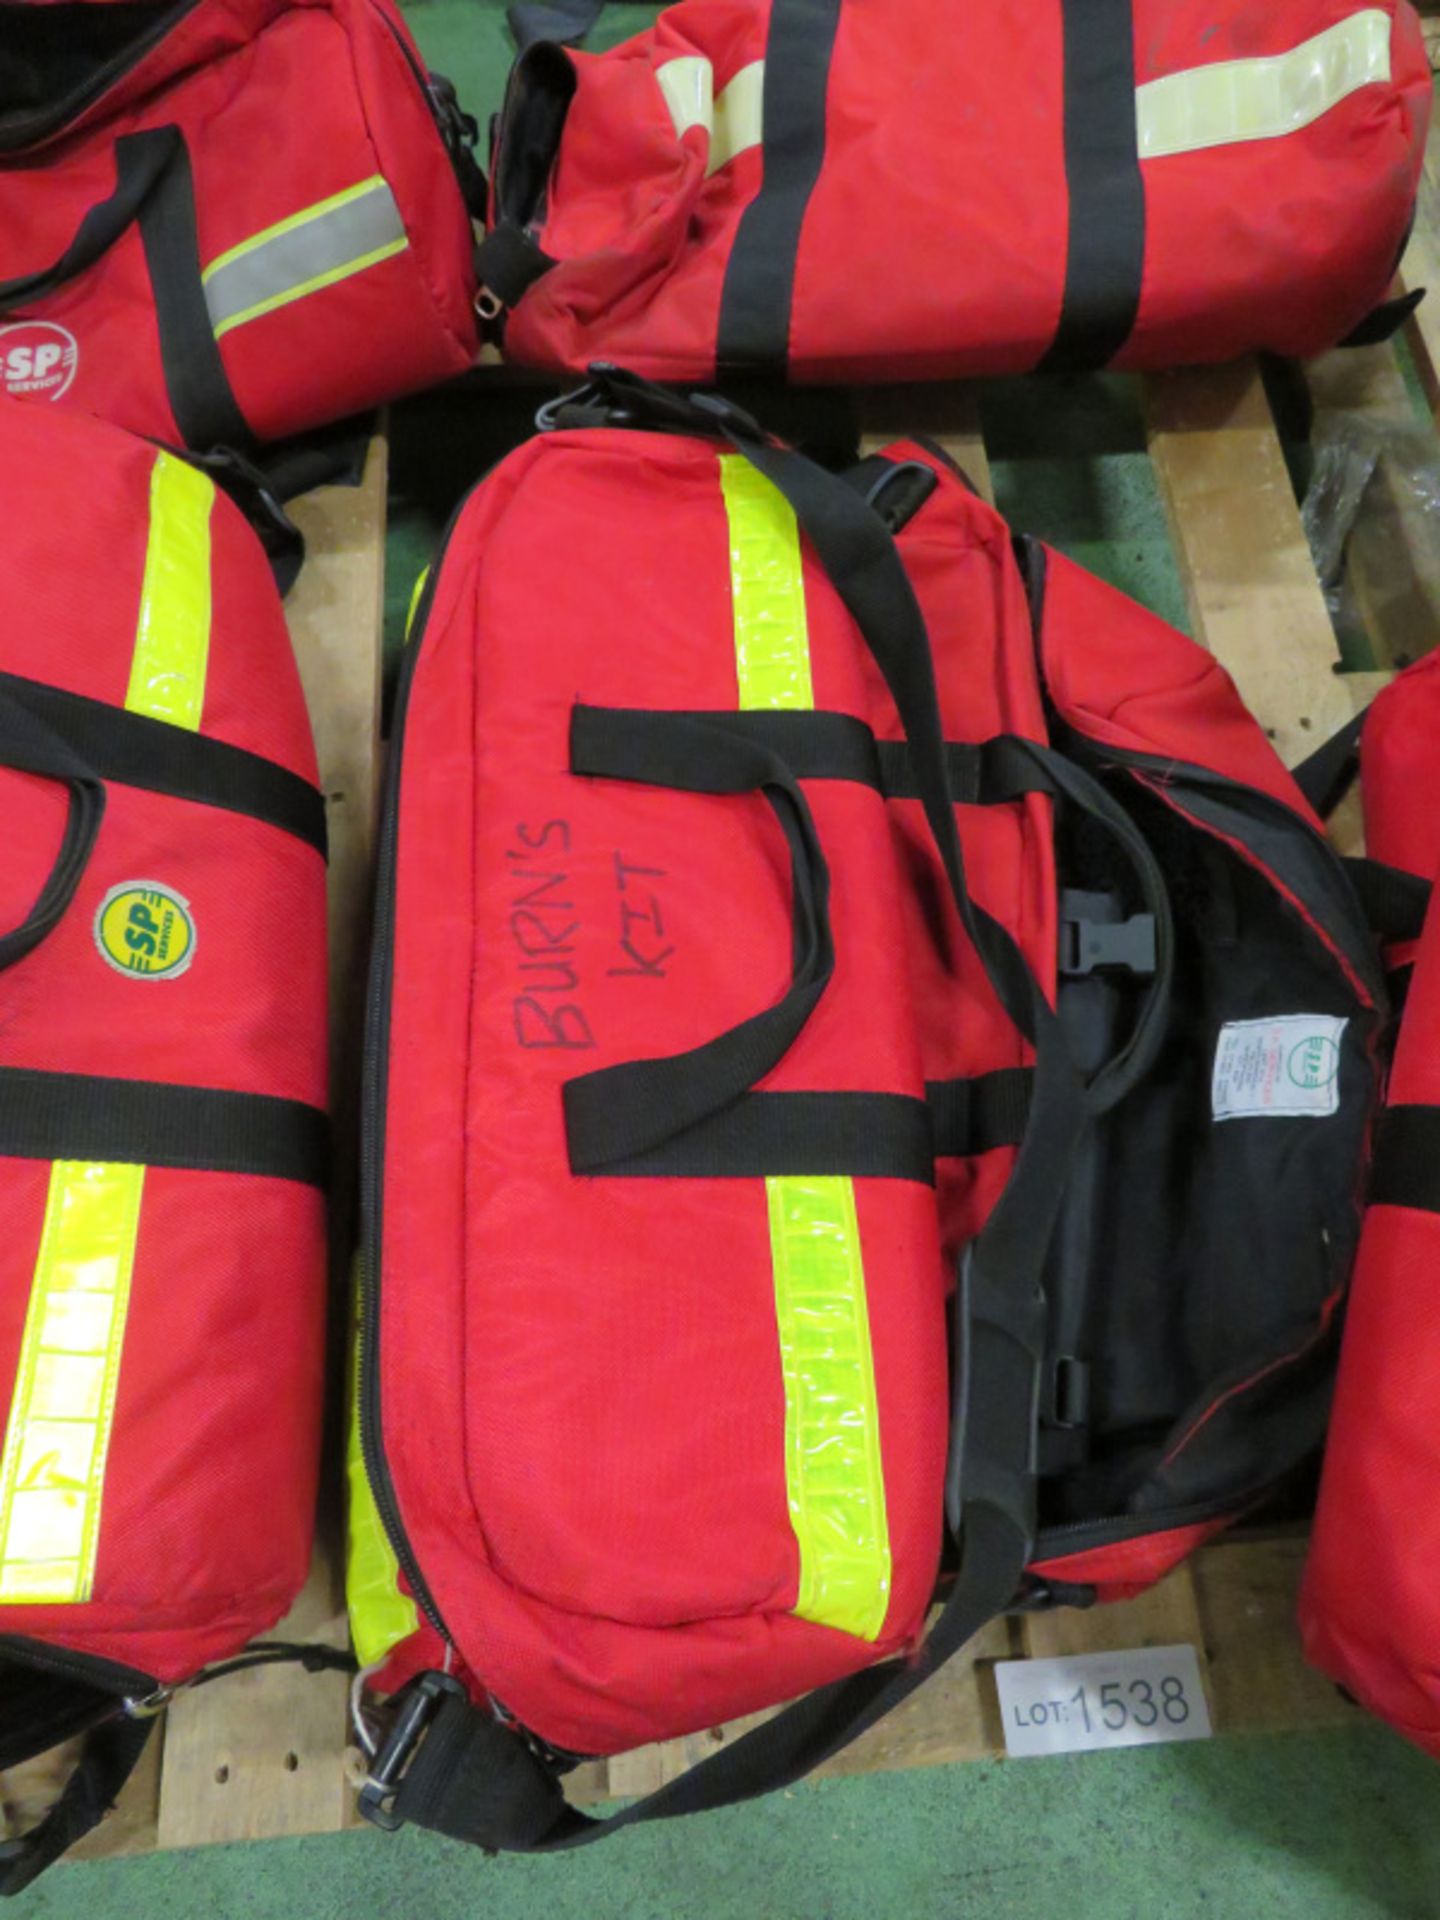 8x Red Medical Bags - 7x SP Services & 1x unbranded - Image 2 of 3